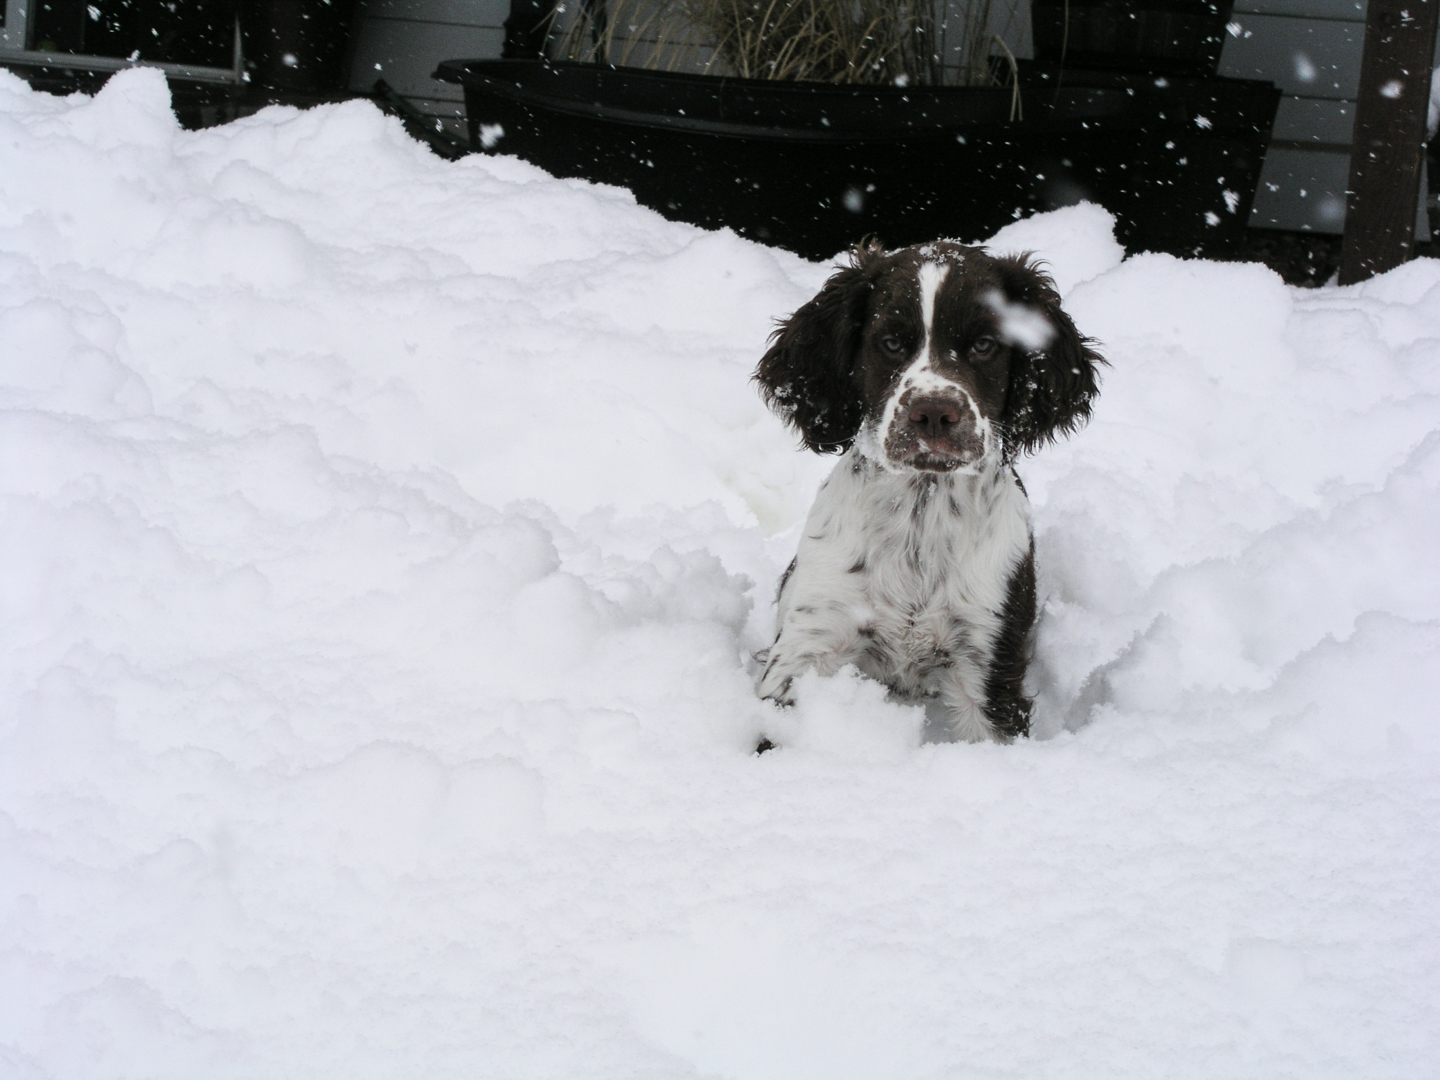 Friday Photo - Hound in the Snow